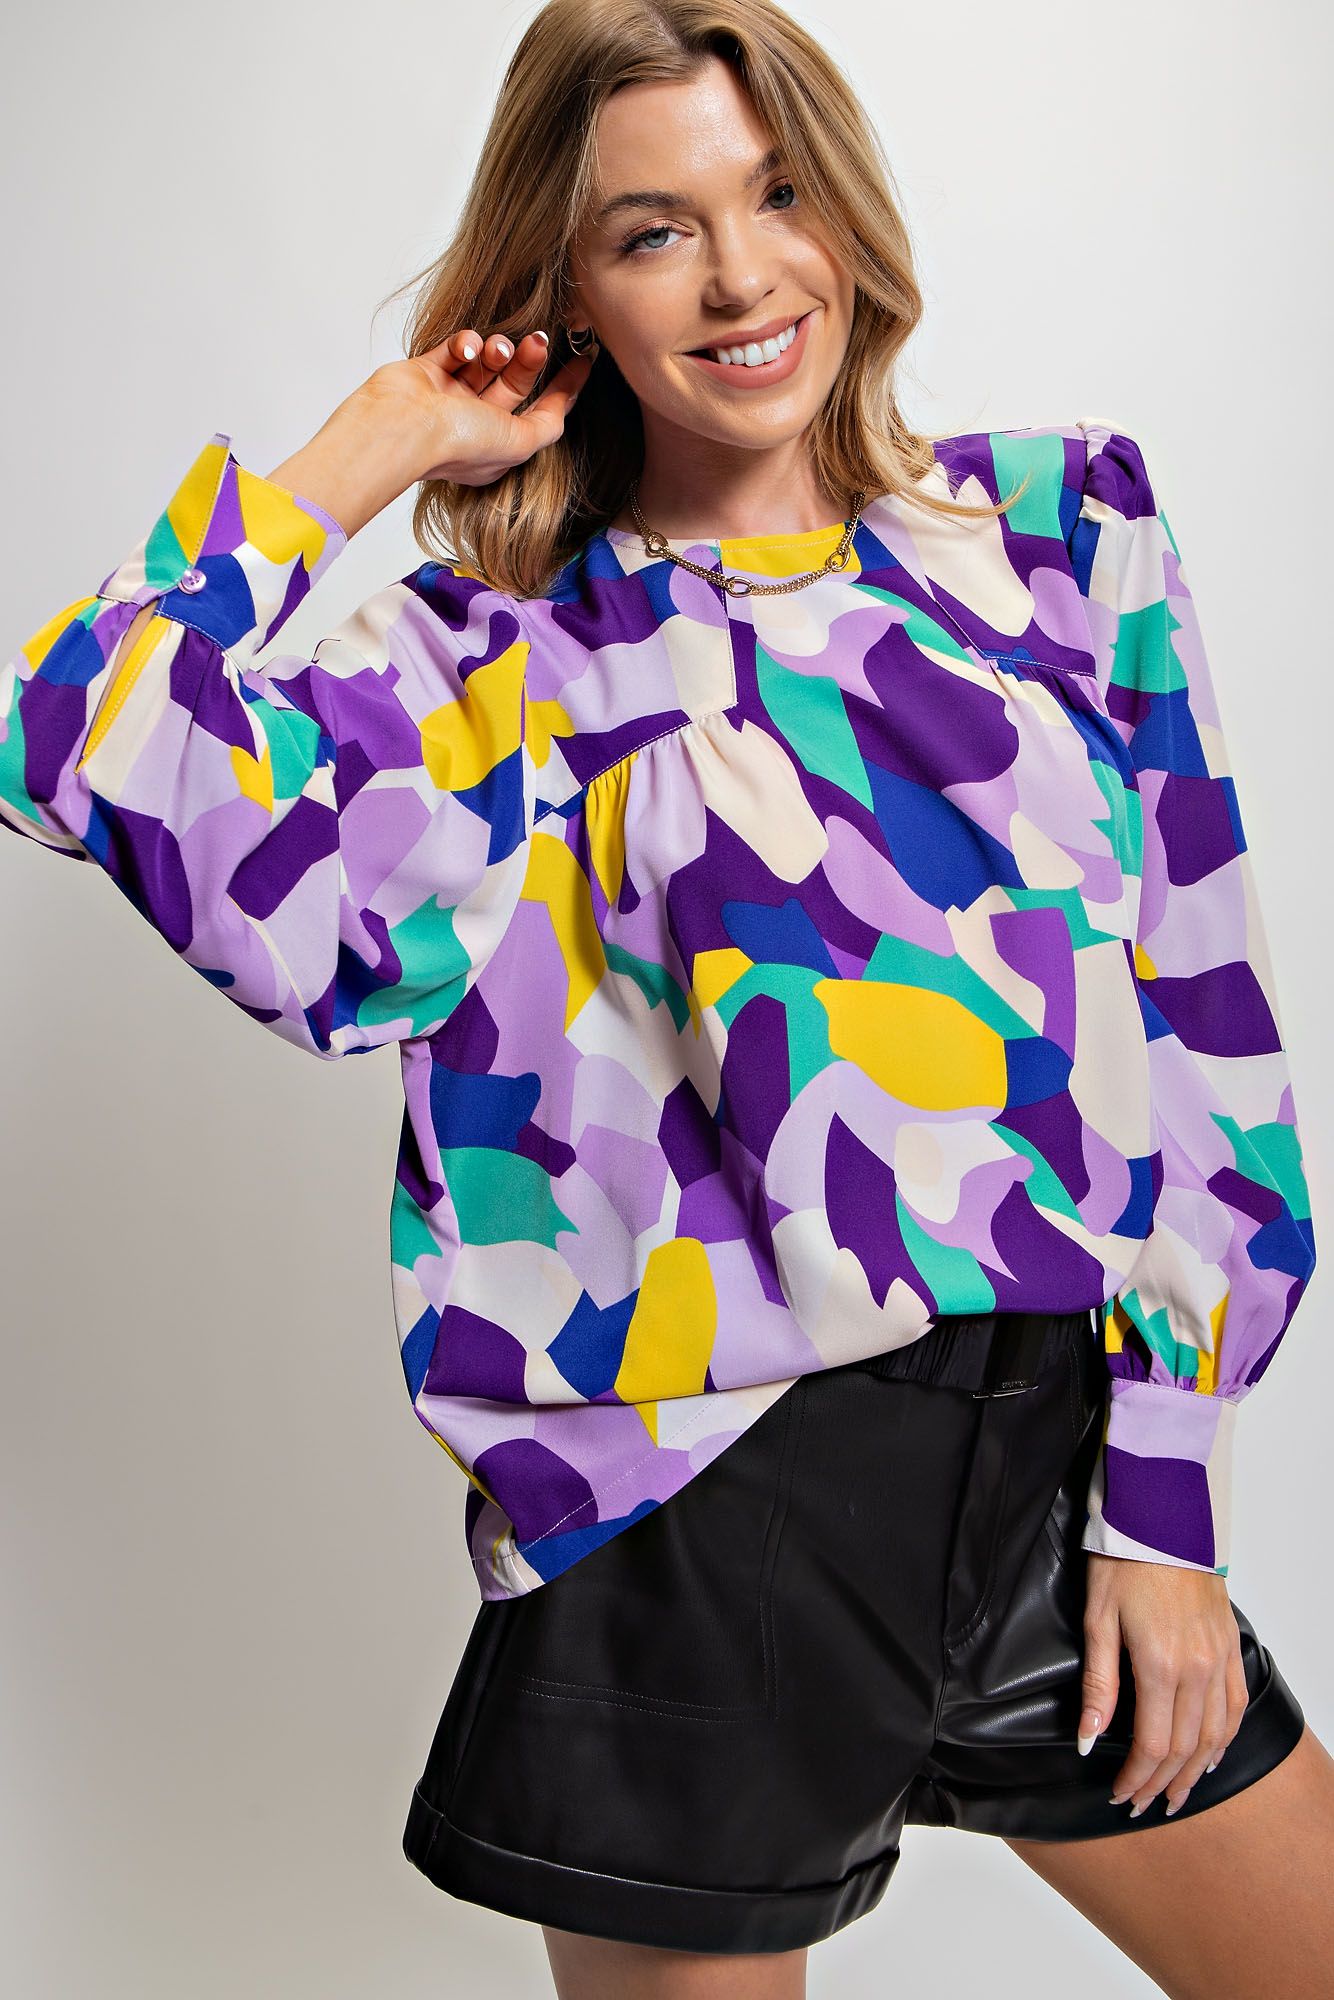 Easel Geometric Multicolor Printed Wool Button Up Cuff Lightweight Blouse - Roulhac Fashion Boutique